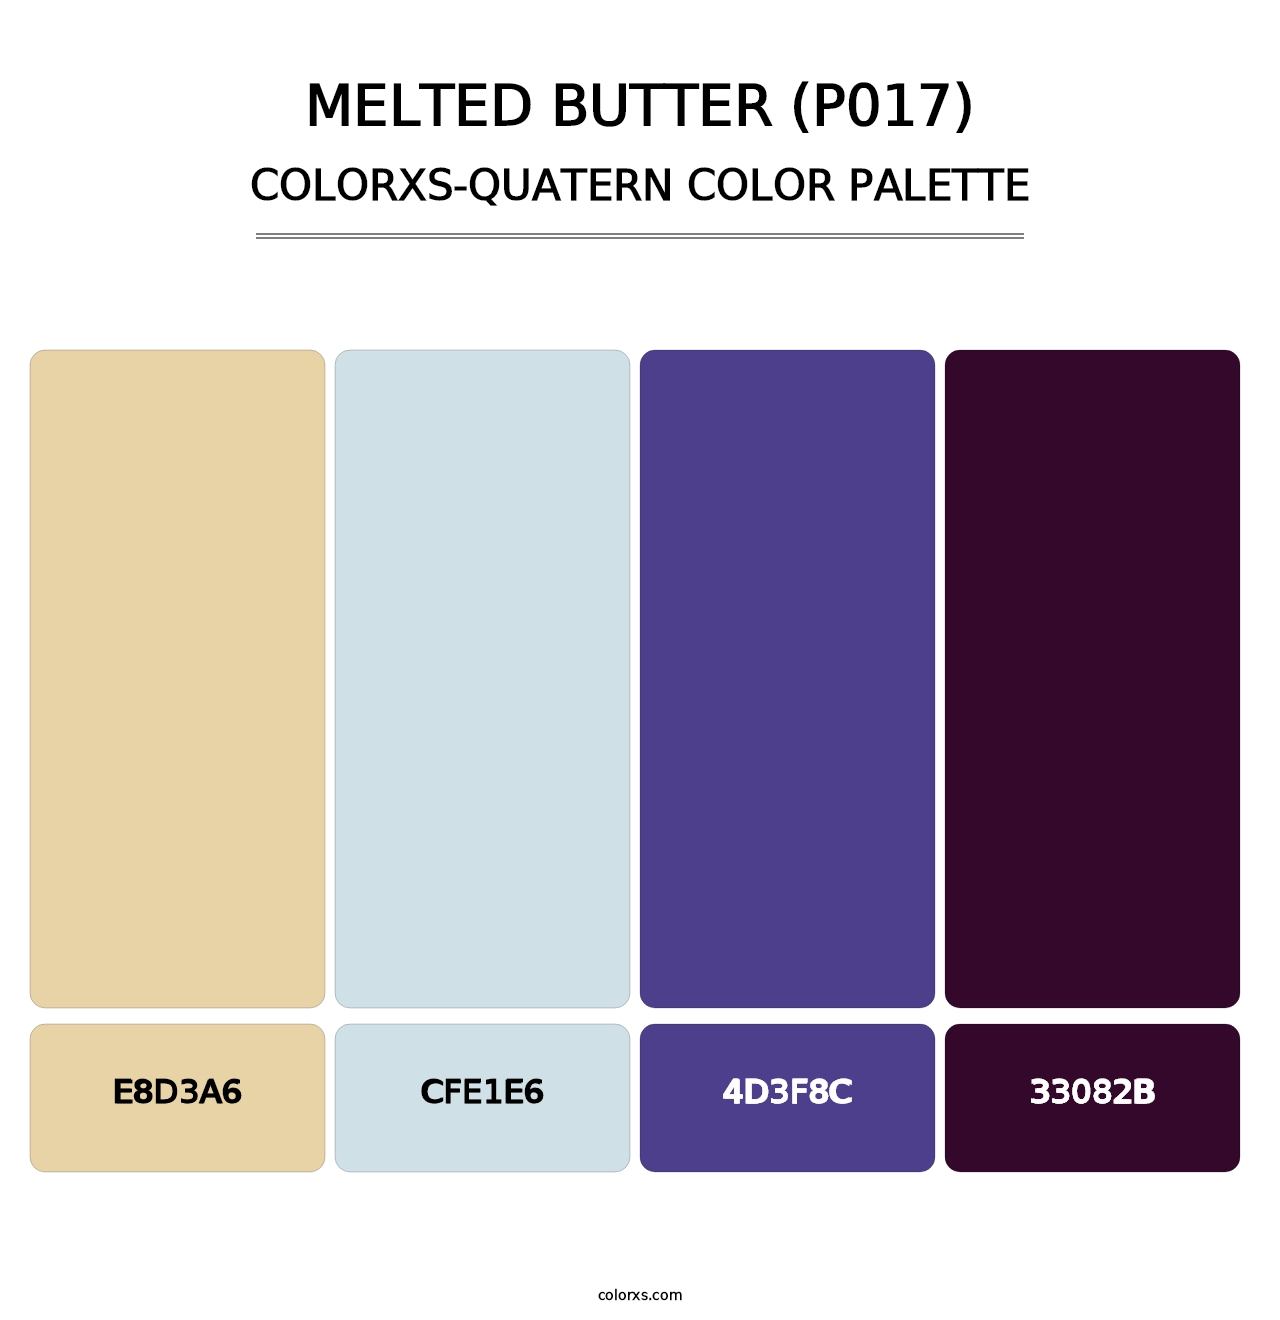 Melted Butter (P017) - Colorxs Quatern Palette